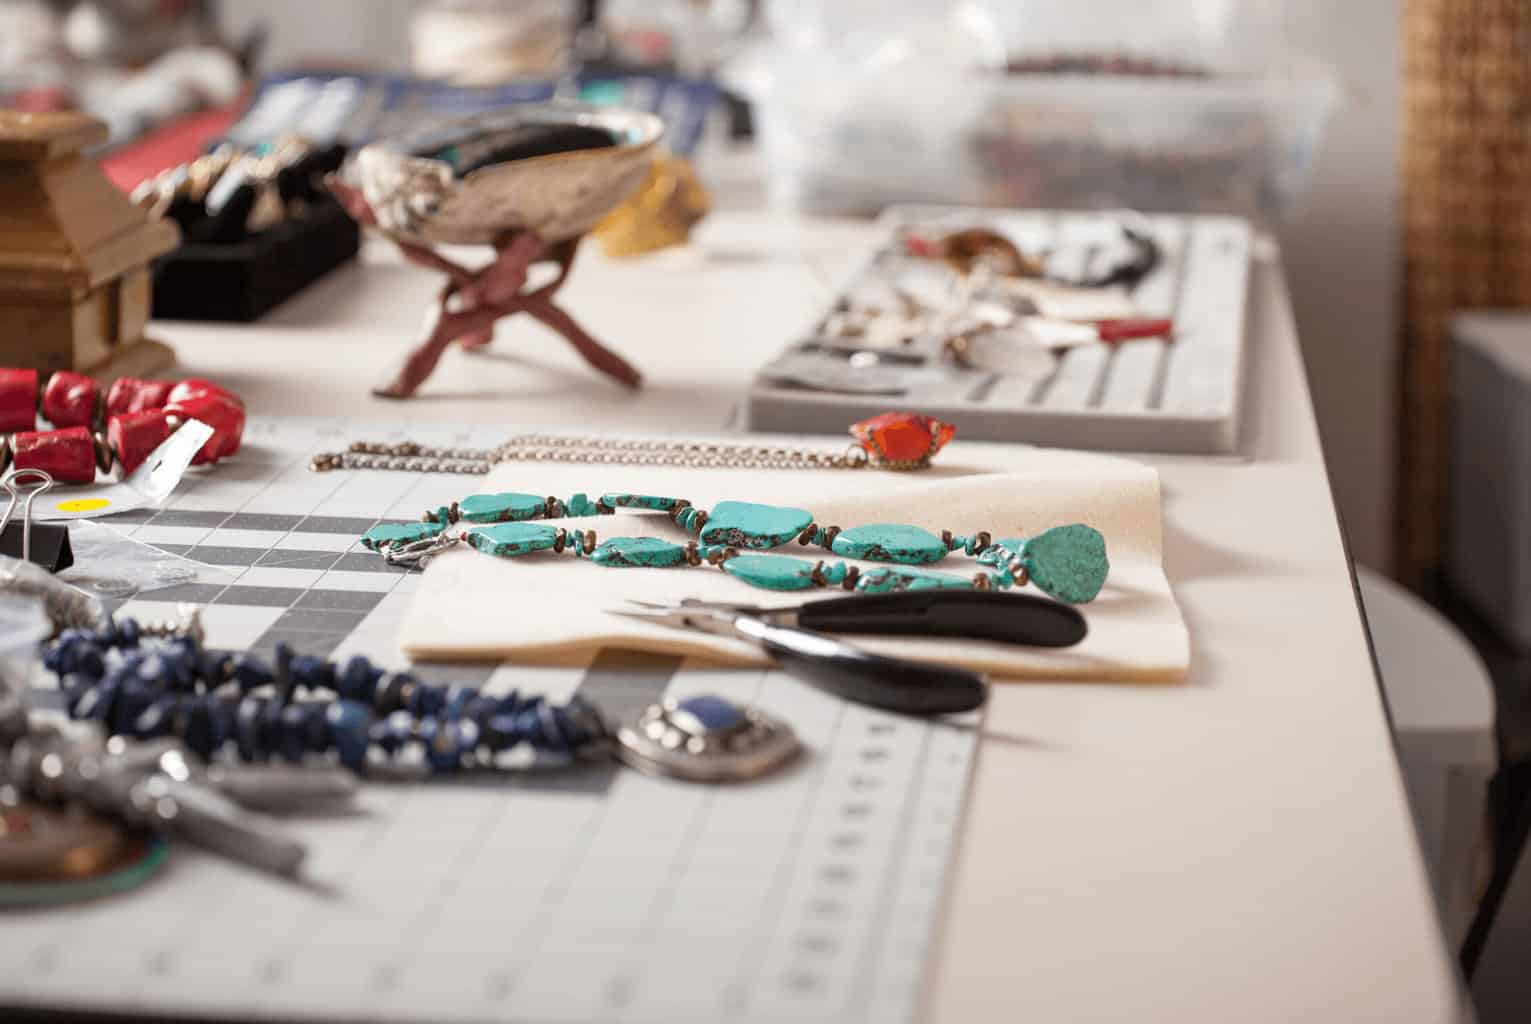 14 Gorgeous Jewelry-Making Kits for Adults for Guaranteed Fun and